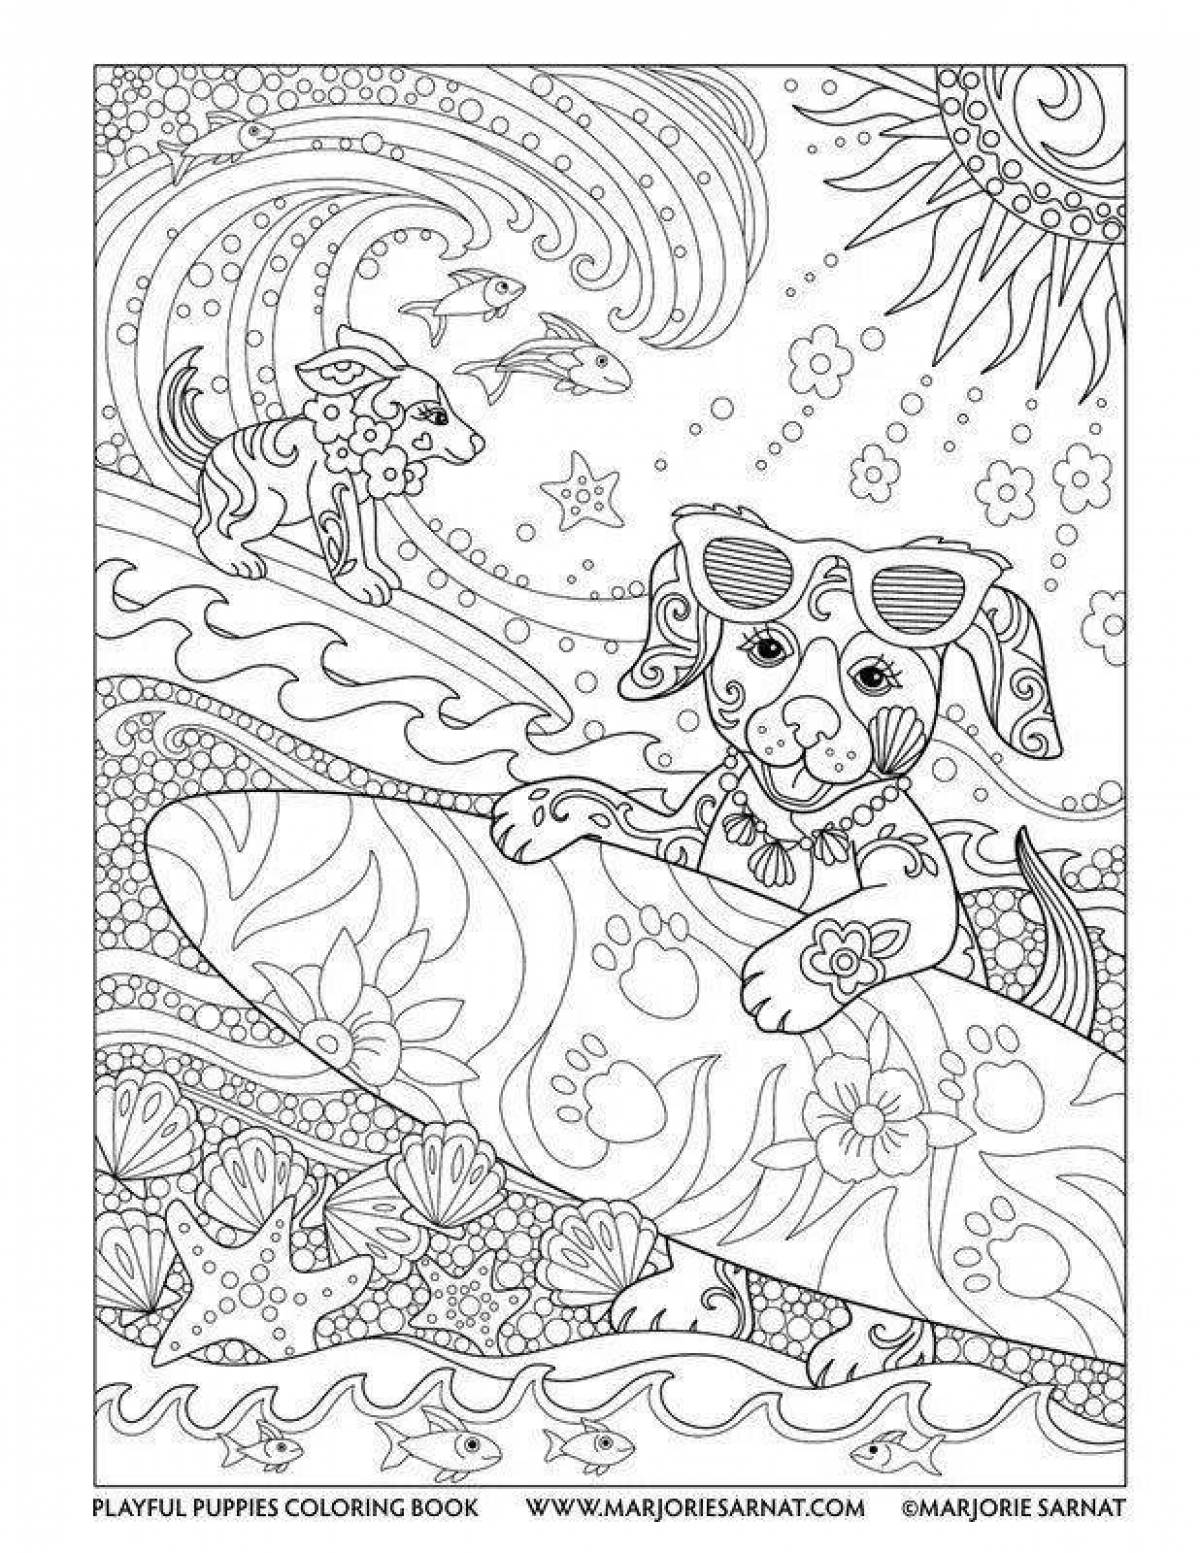 Loyal dog coloring pages for adults